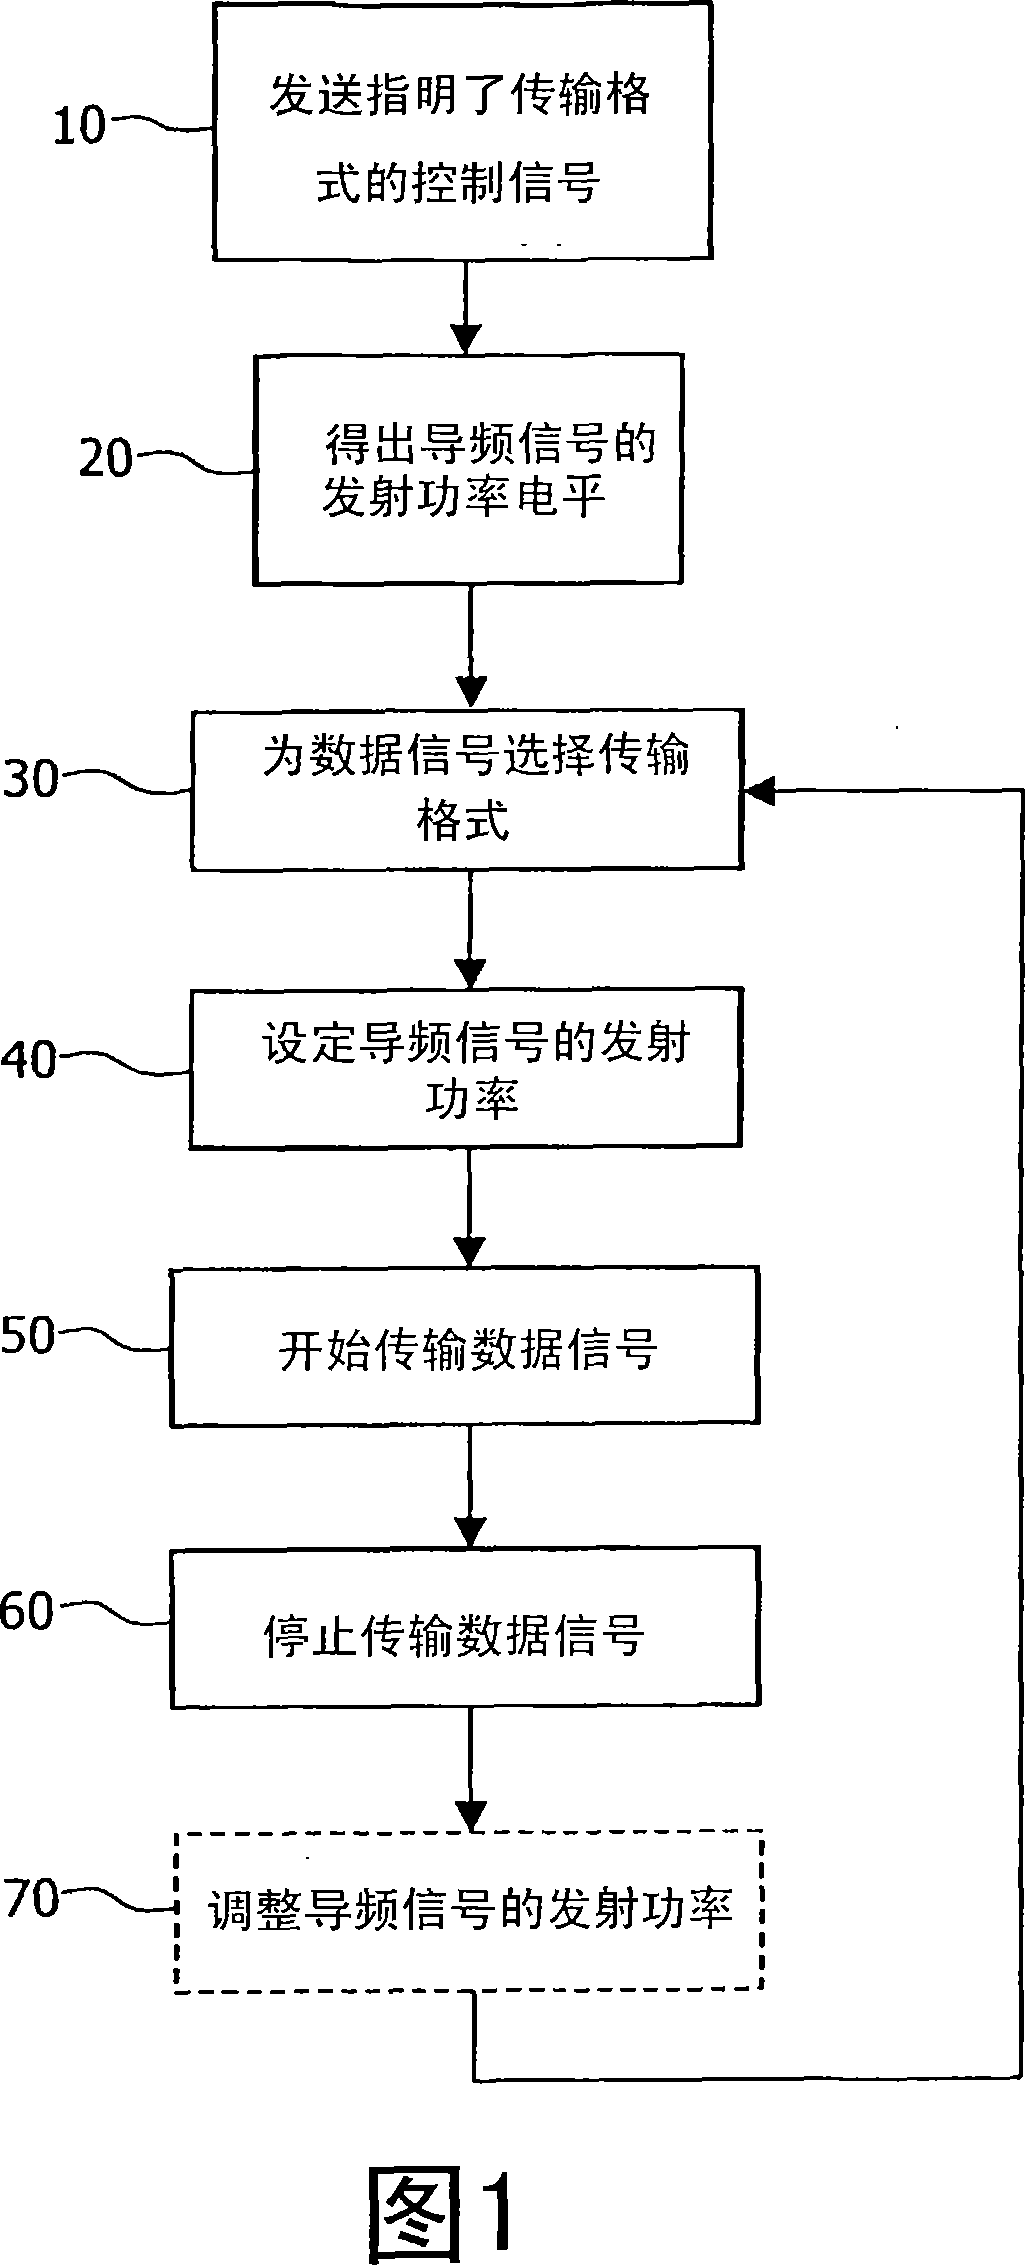 A method of operating a communication system, a radio station, and a radio communication system